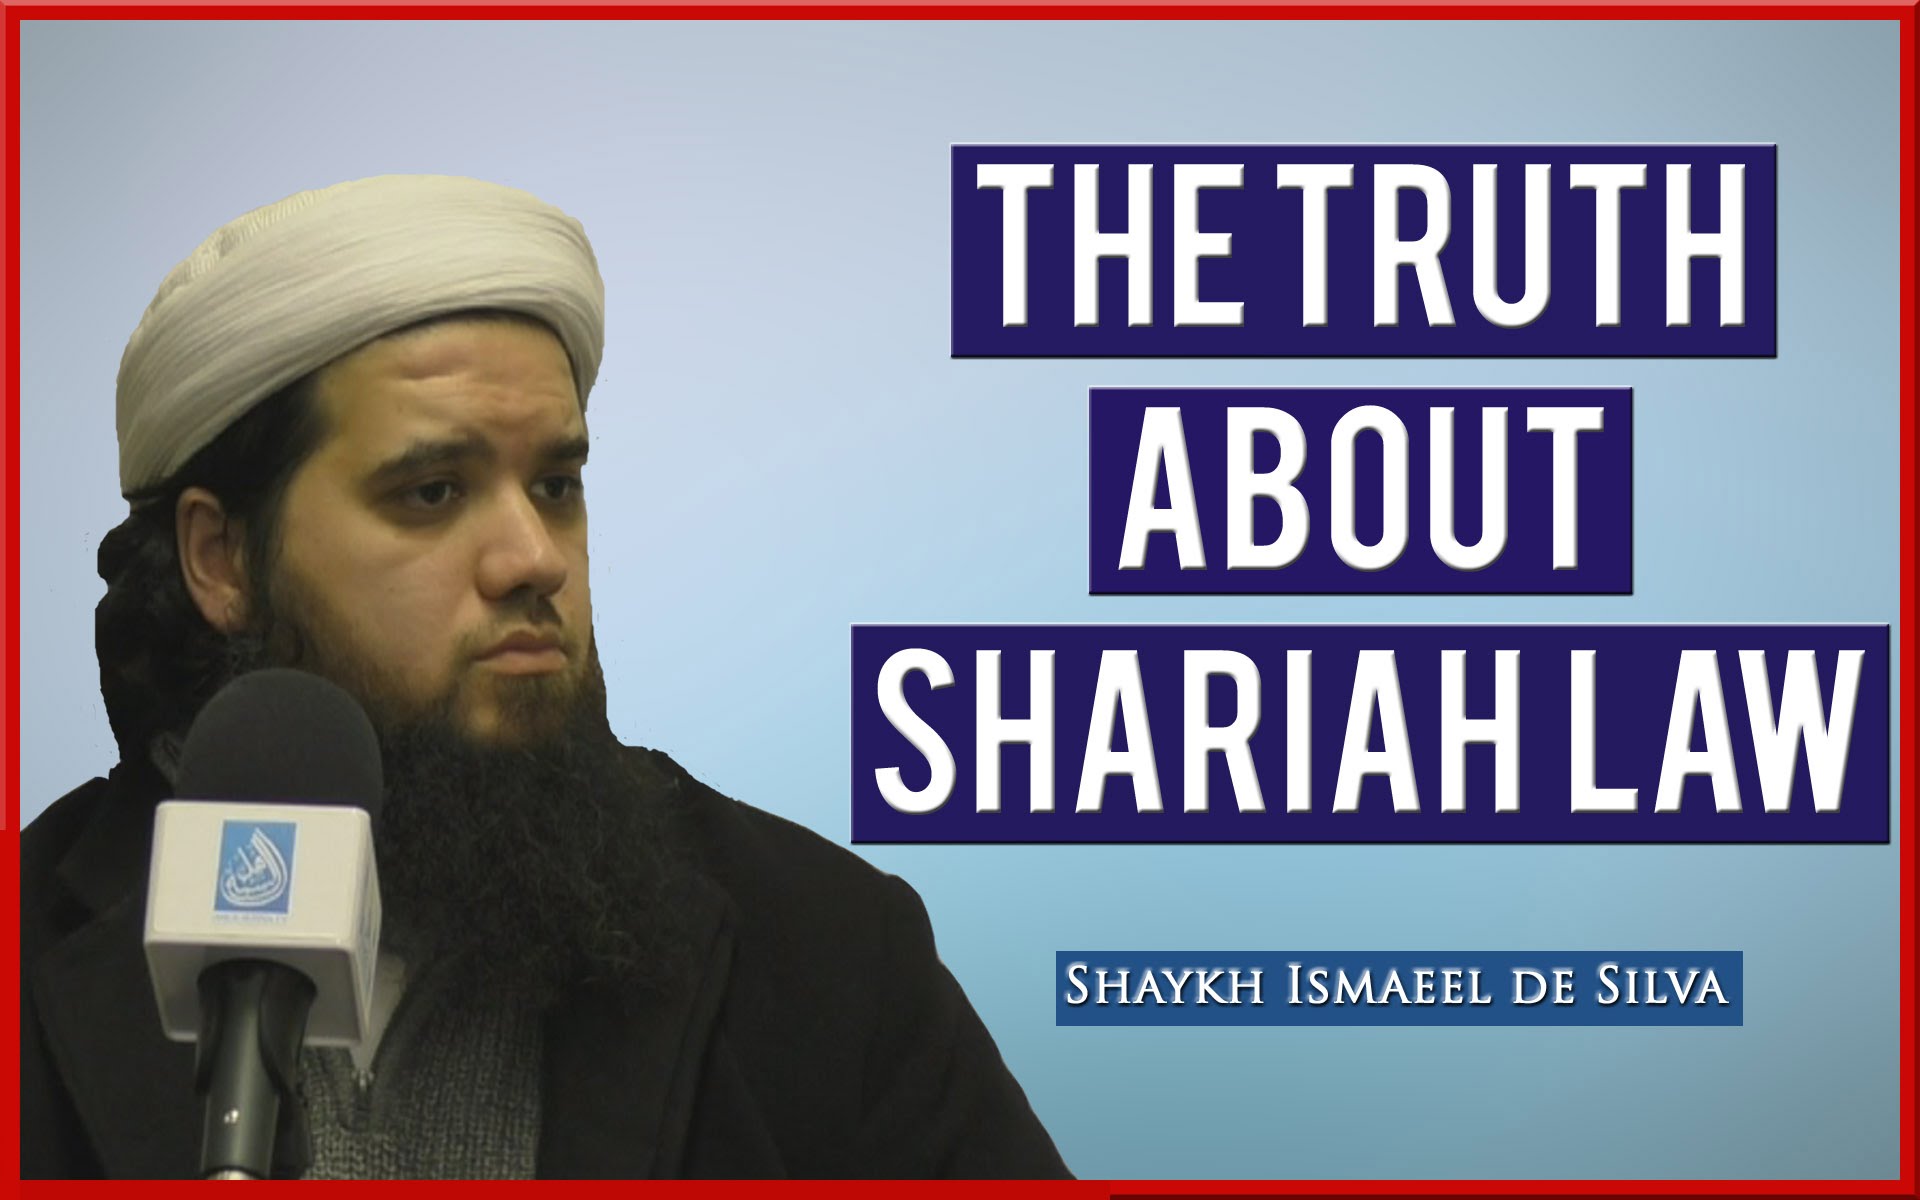 The Truth About Shariah Law [Full Lecture] – Shaykh Ismaeel de Silva